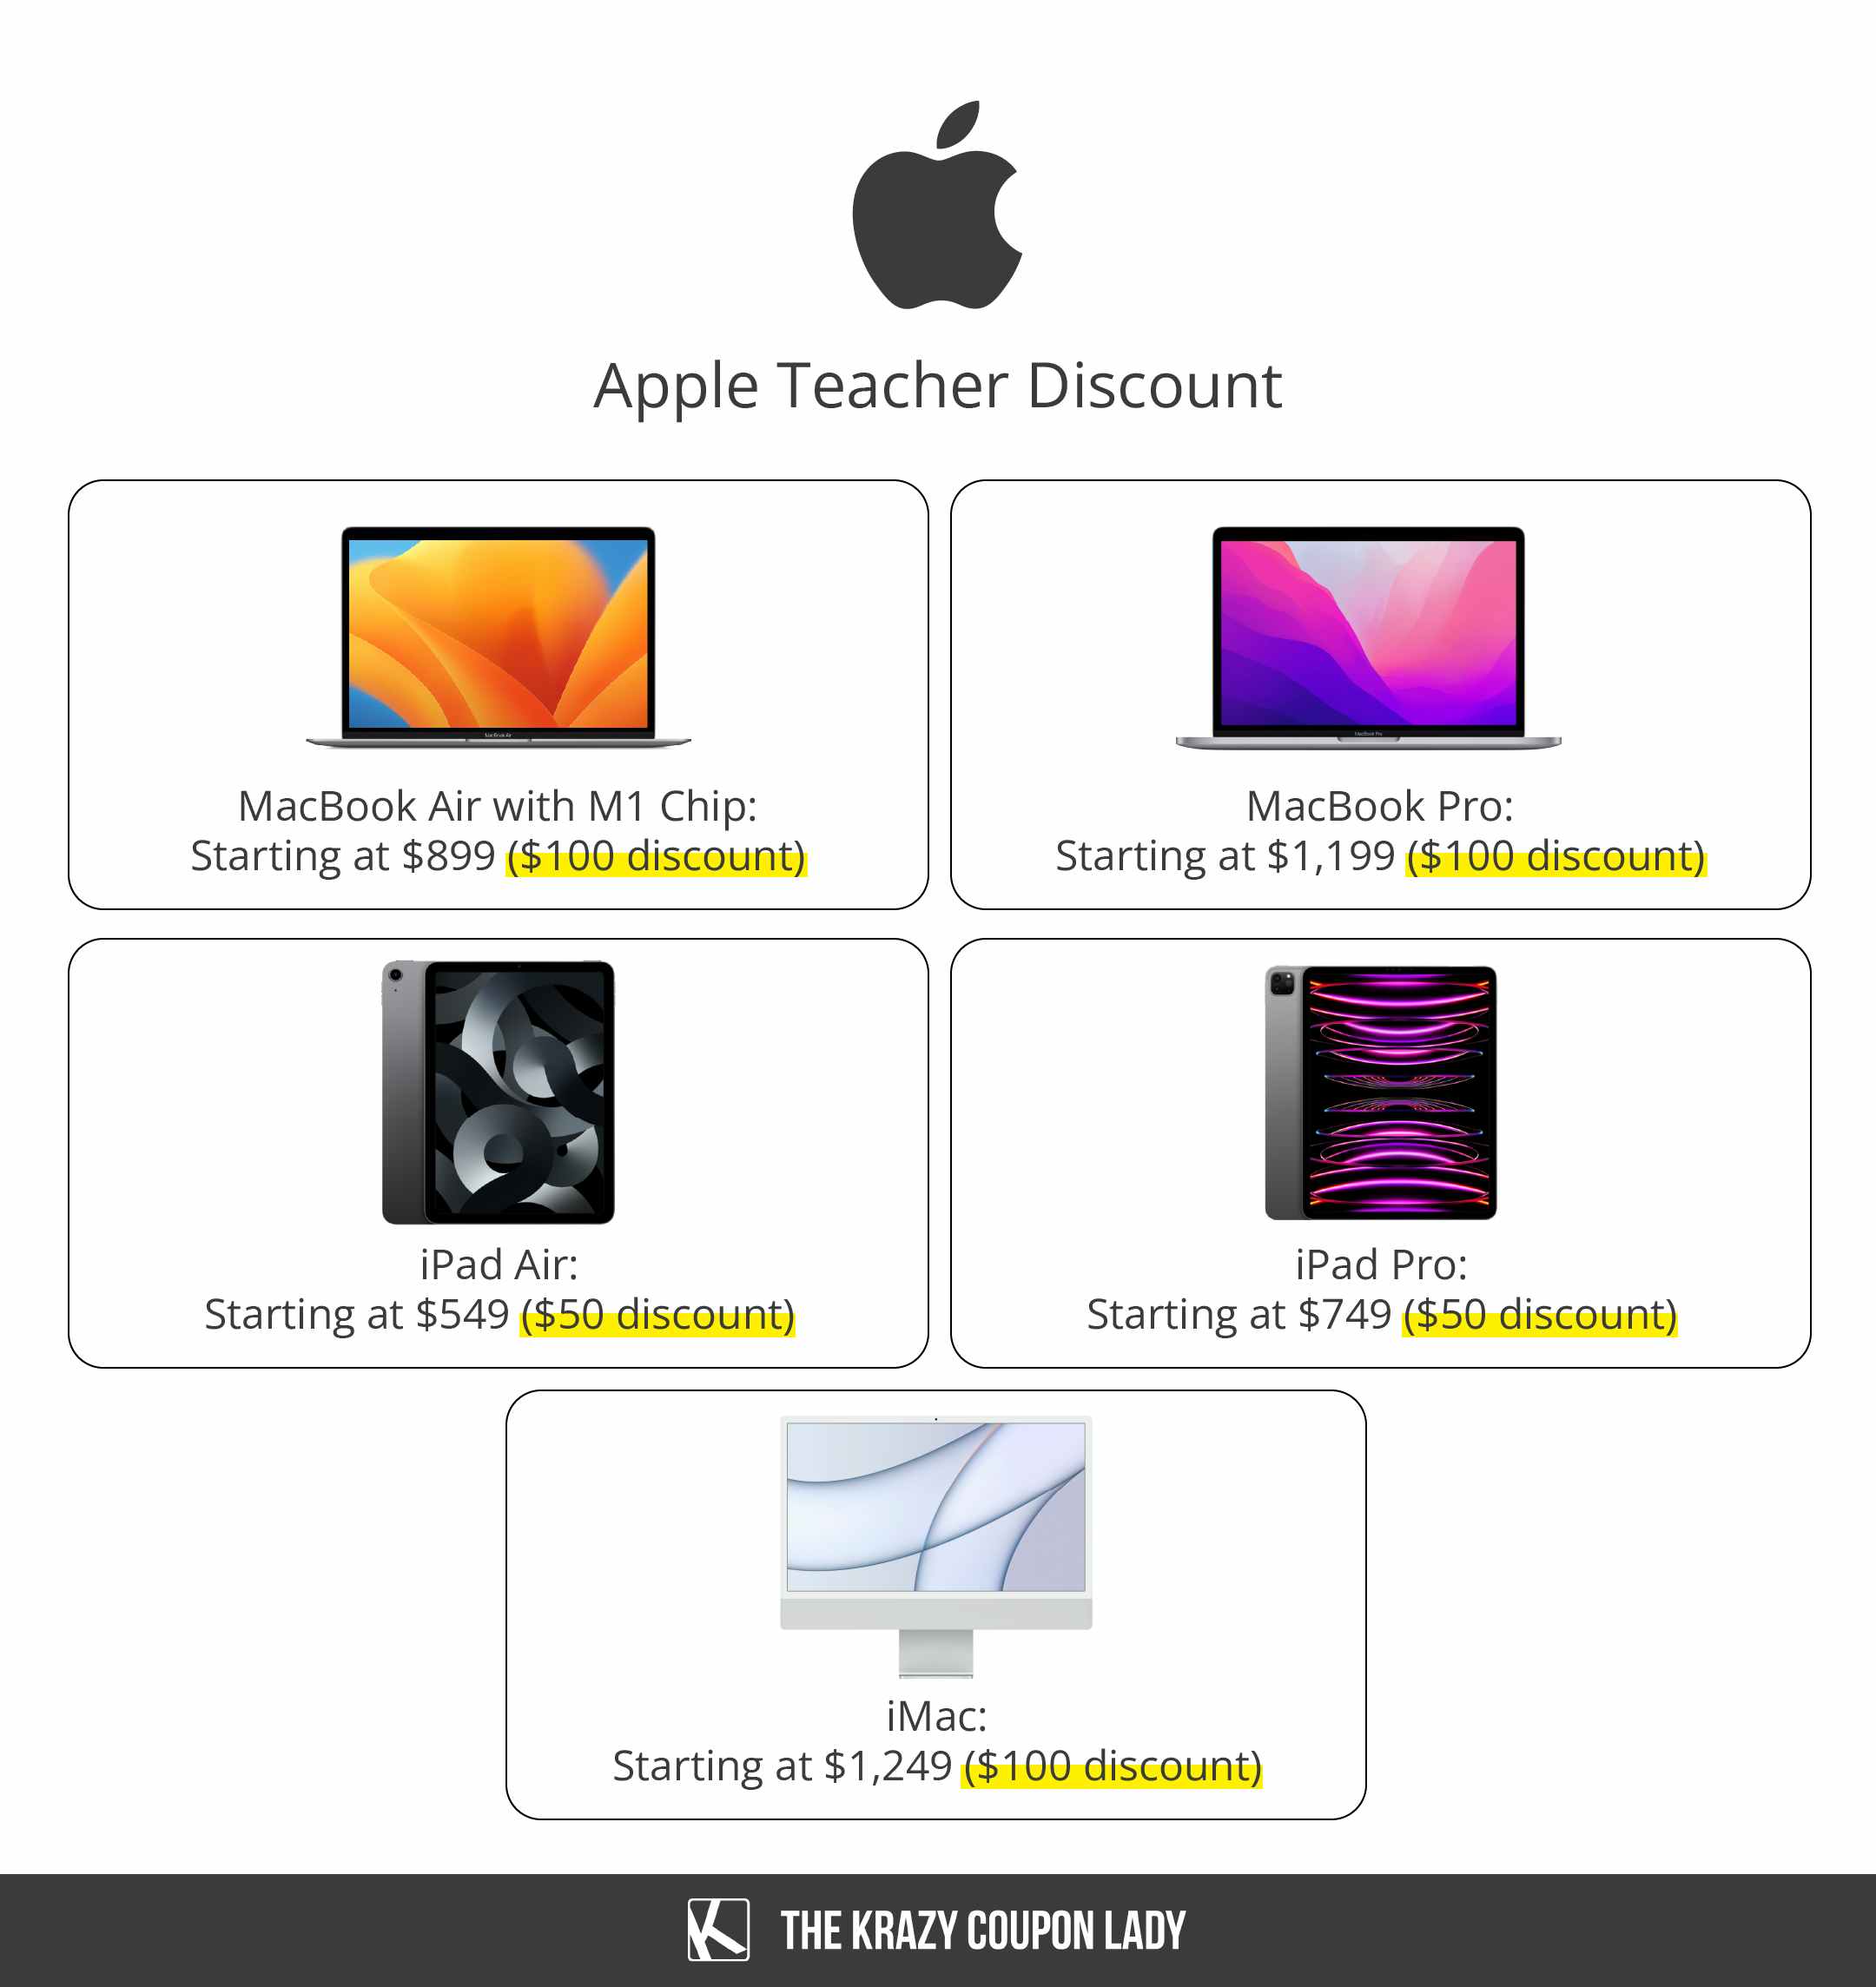 apple teacher discount products and prices graphic